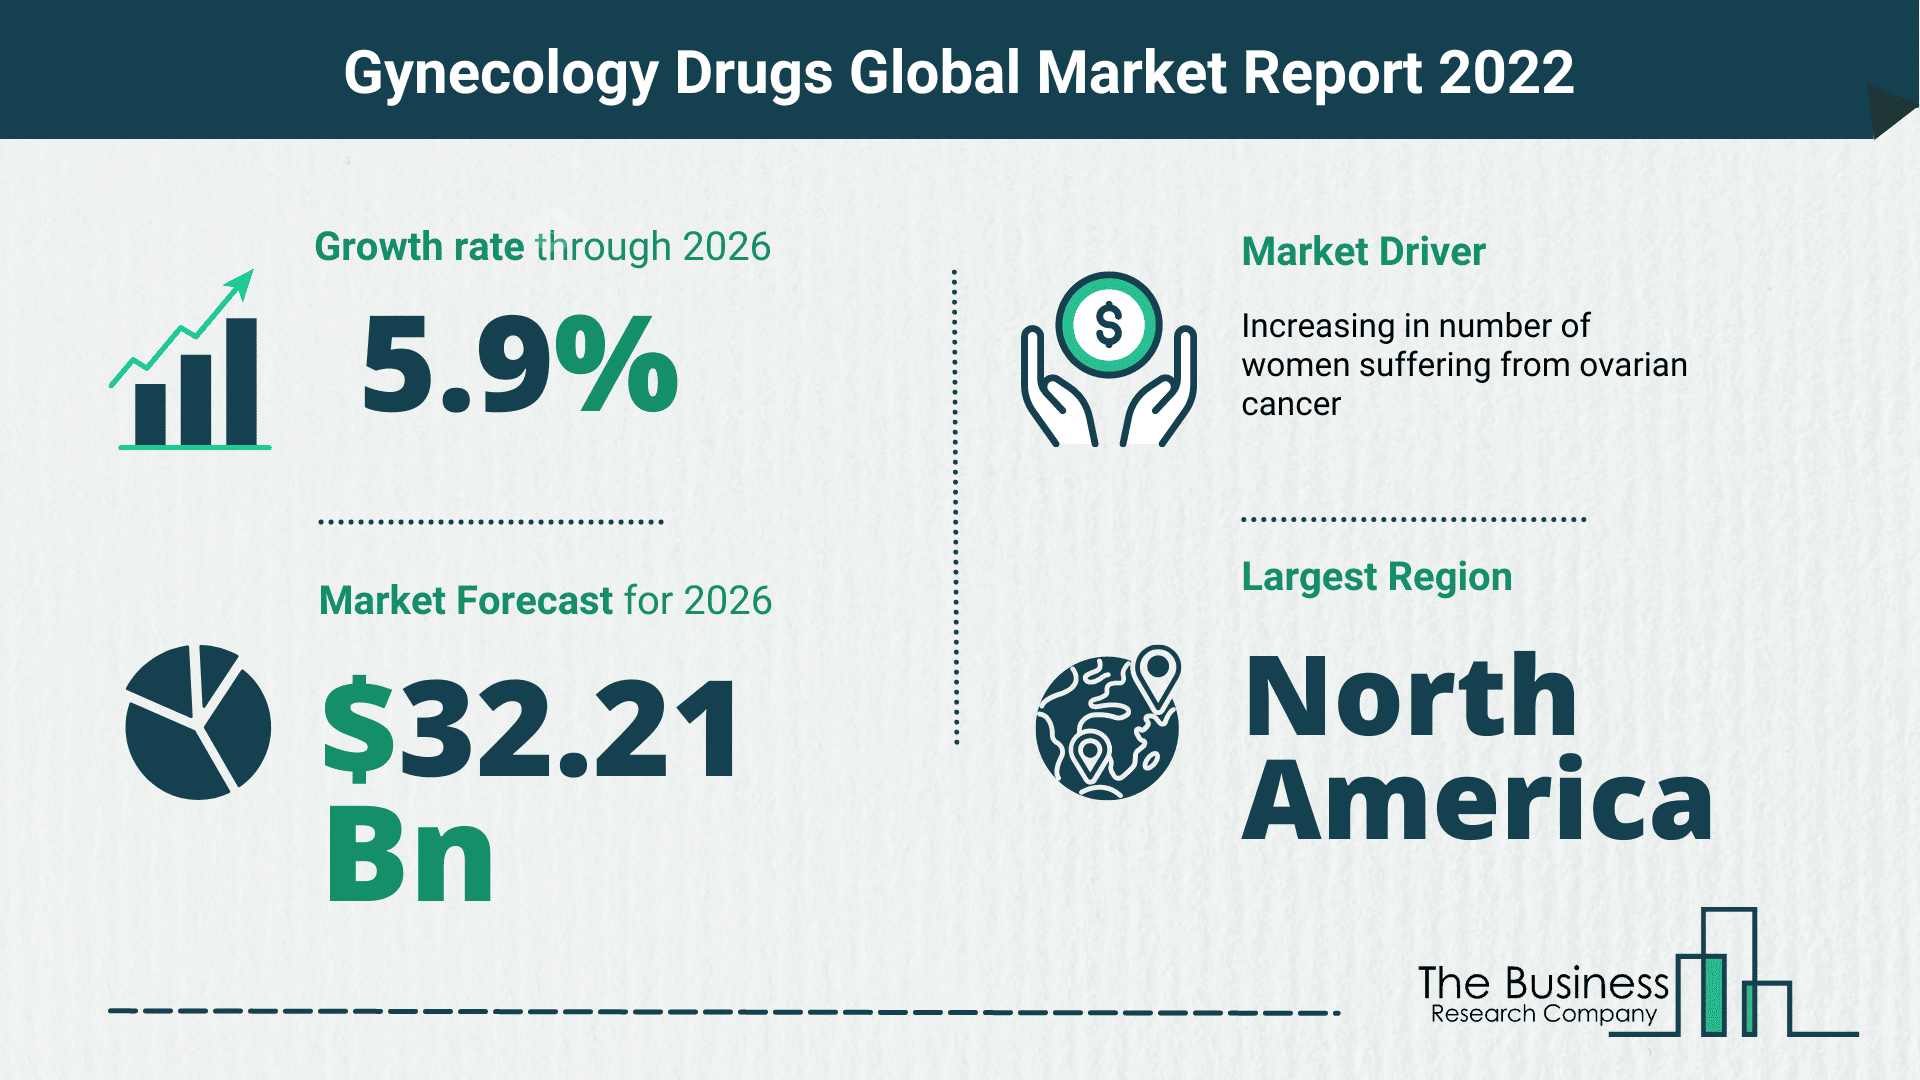 How Will The Gynecology Drugs Market Grow In 2022?